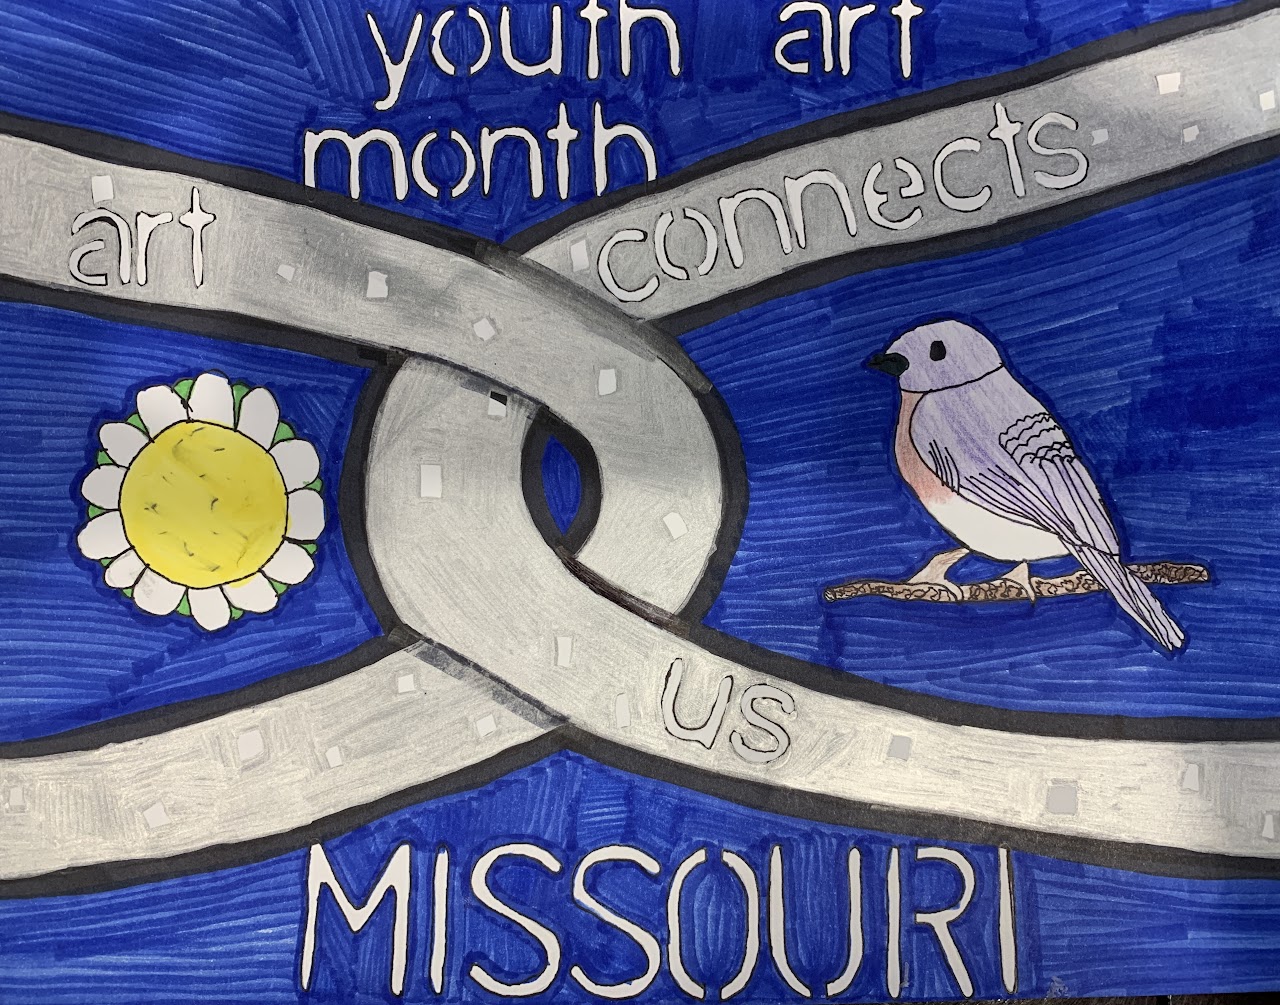 2022 Youth Art Month winning flag design for Missouri by 6th grader Lula George. The design features a blue background over which two pieces of chain are linked together. Text of the 2022 theme “Art Connects Us” runs through the chain links. Inside the negative space on the left side of the flag is a white flower with yellow center, a representation of the state flower, the hawthorn. Inside the negative space on the right side of the flag is a drawing of a bird, a representation of the state bird, the eastern bluebird. At the top-center of the flag, text reads “youth art month,” while at the bottom-center text reads “Missouri.”